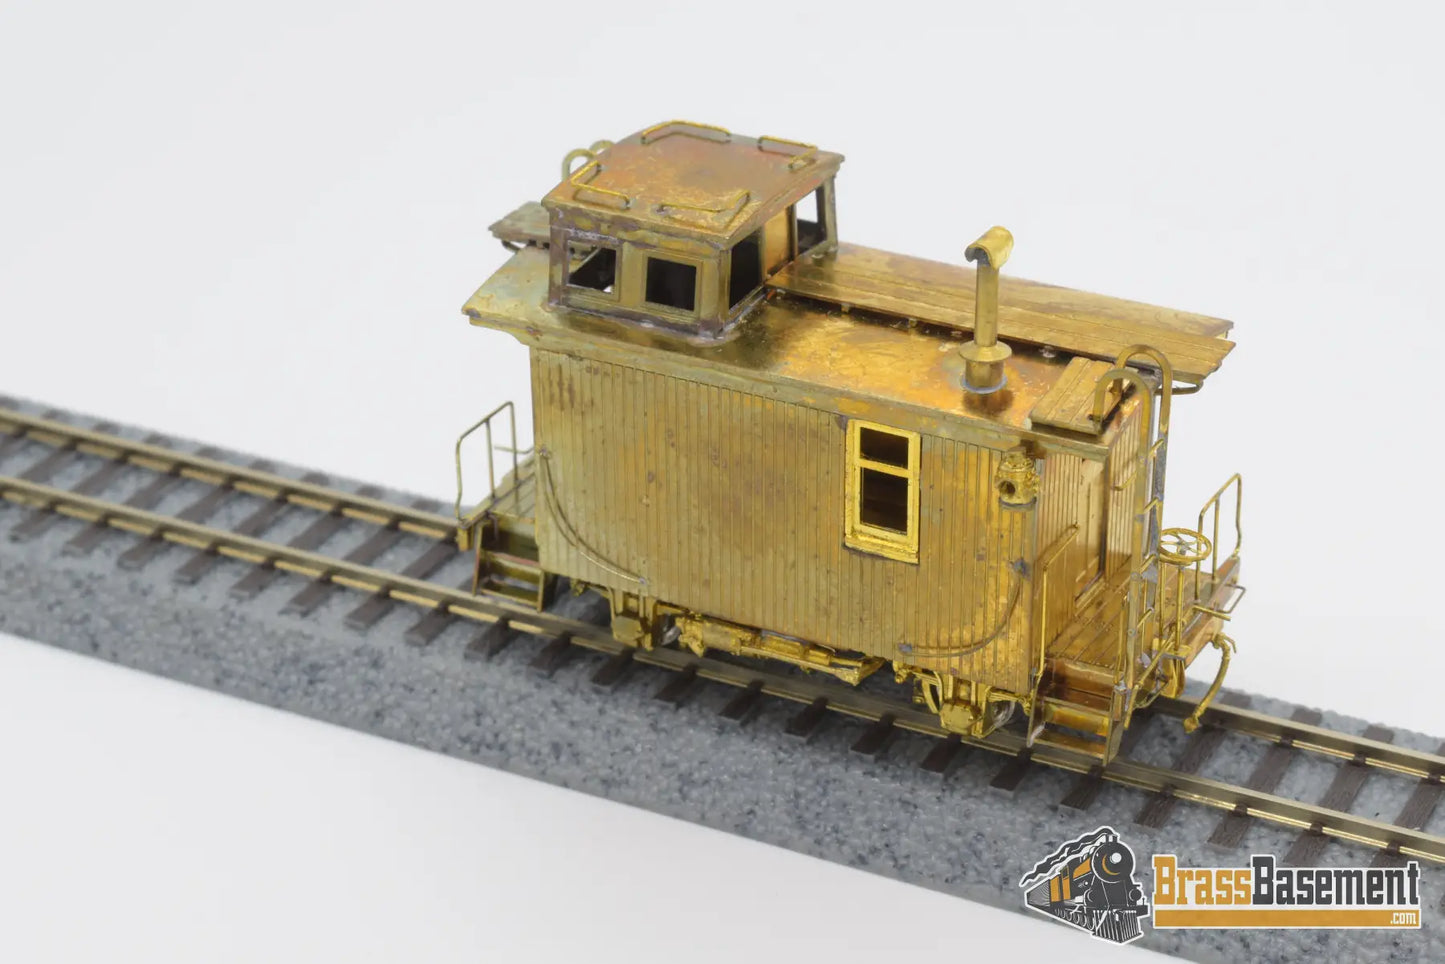 Hon3 Brass - Pfm C&S Colorado & Southern #1006 Caboose Unpainted Decals Included